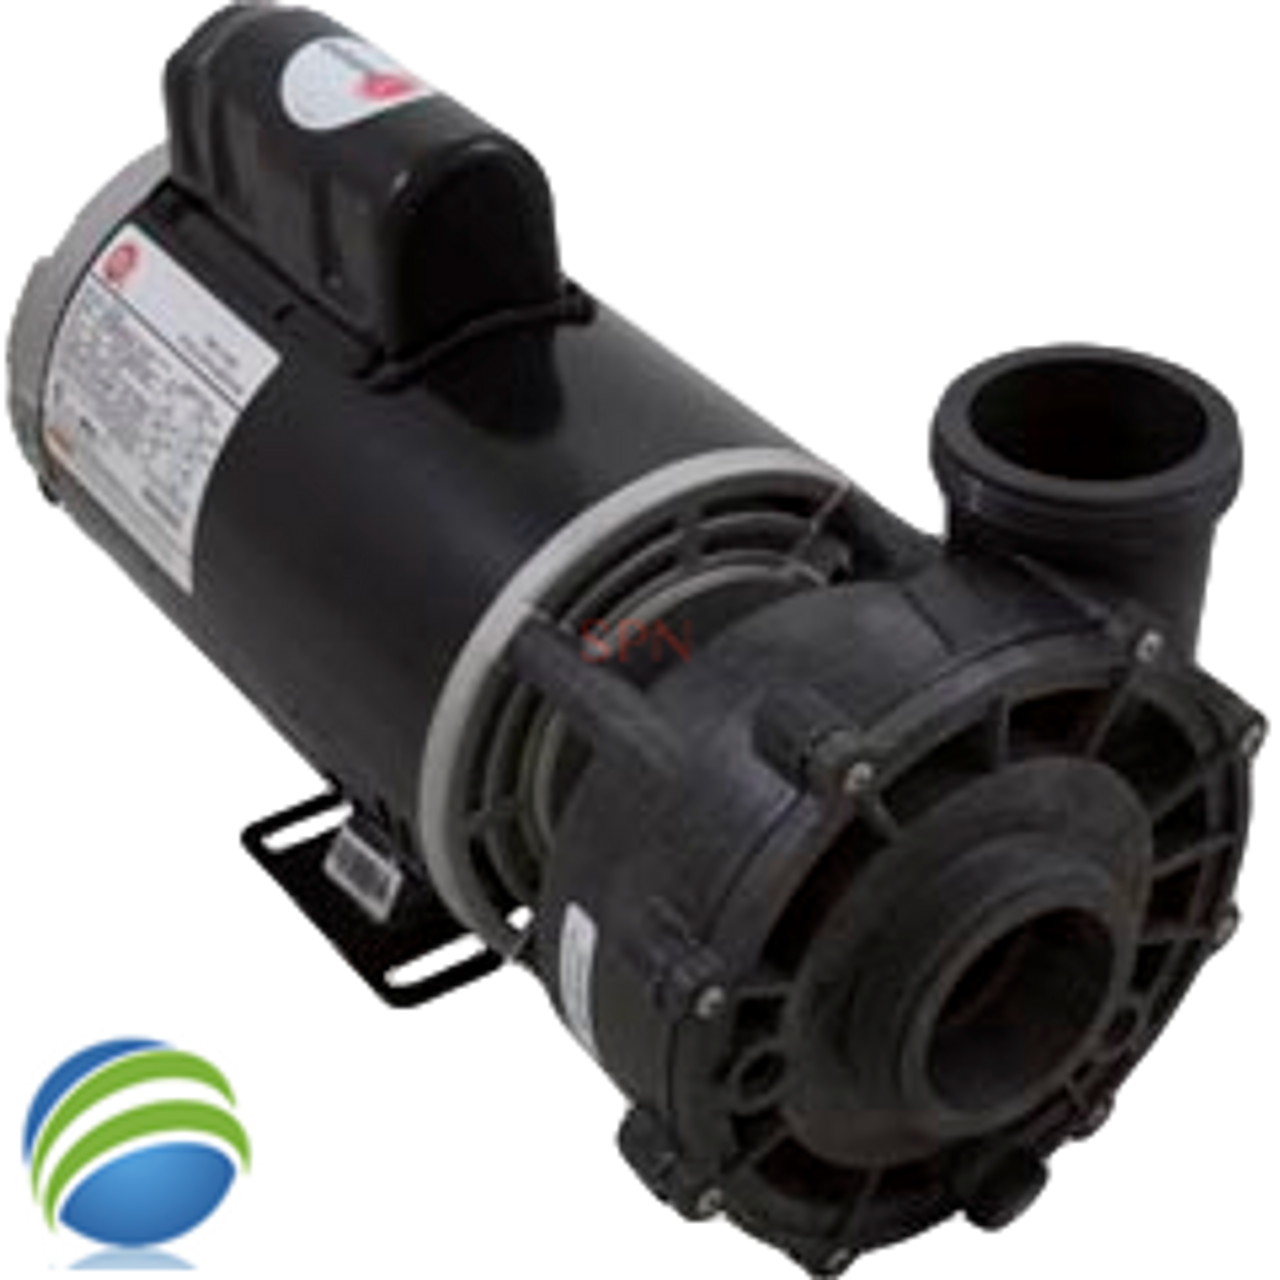 Complete Pump, Aqua-Flo, XP2e,4.0HP ,230v,  56fr, 2"x 2, 1 or 2 Speed 15A
The inlet and outlet measures about 3" across the threads